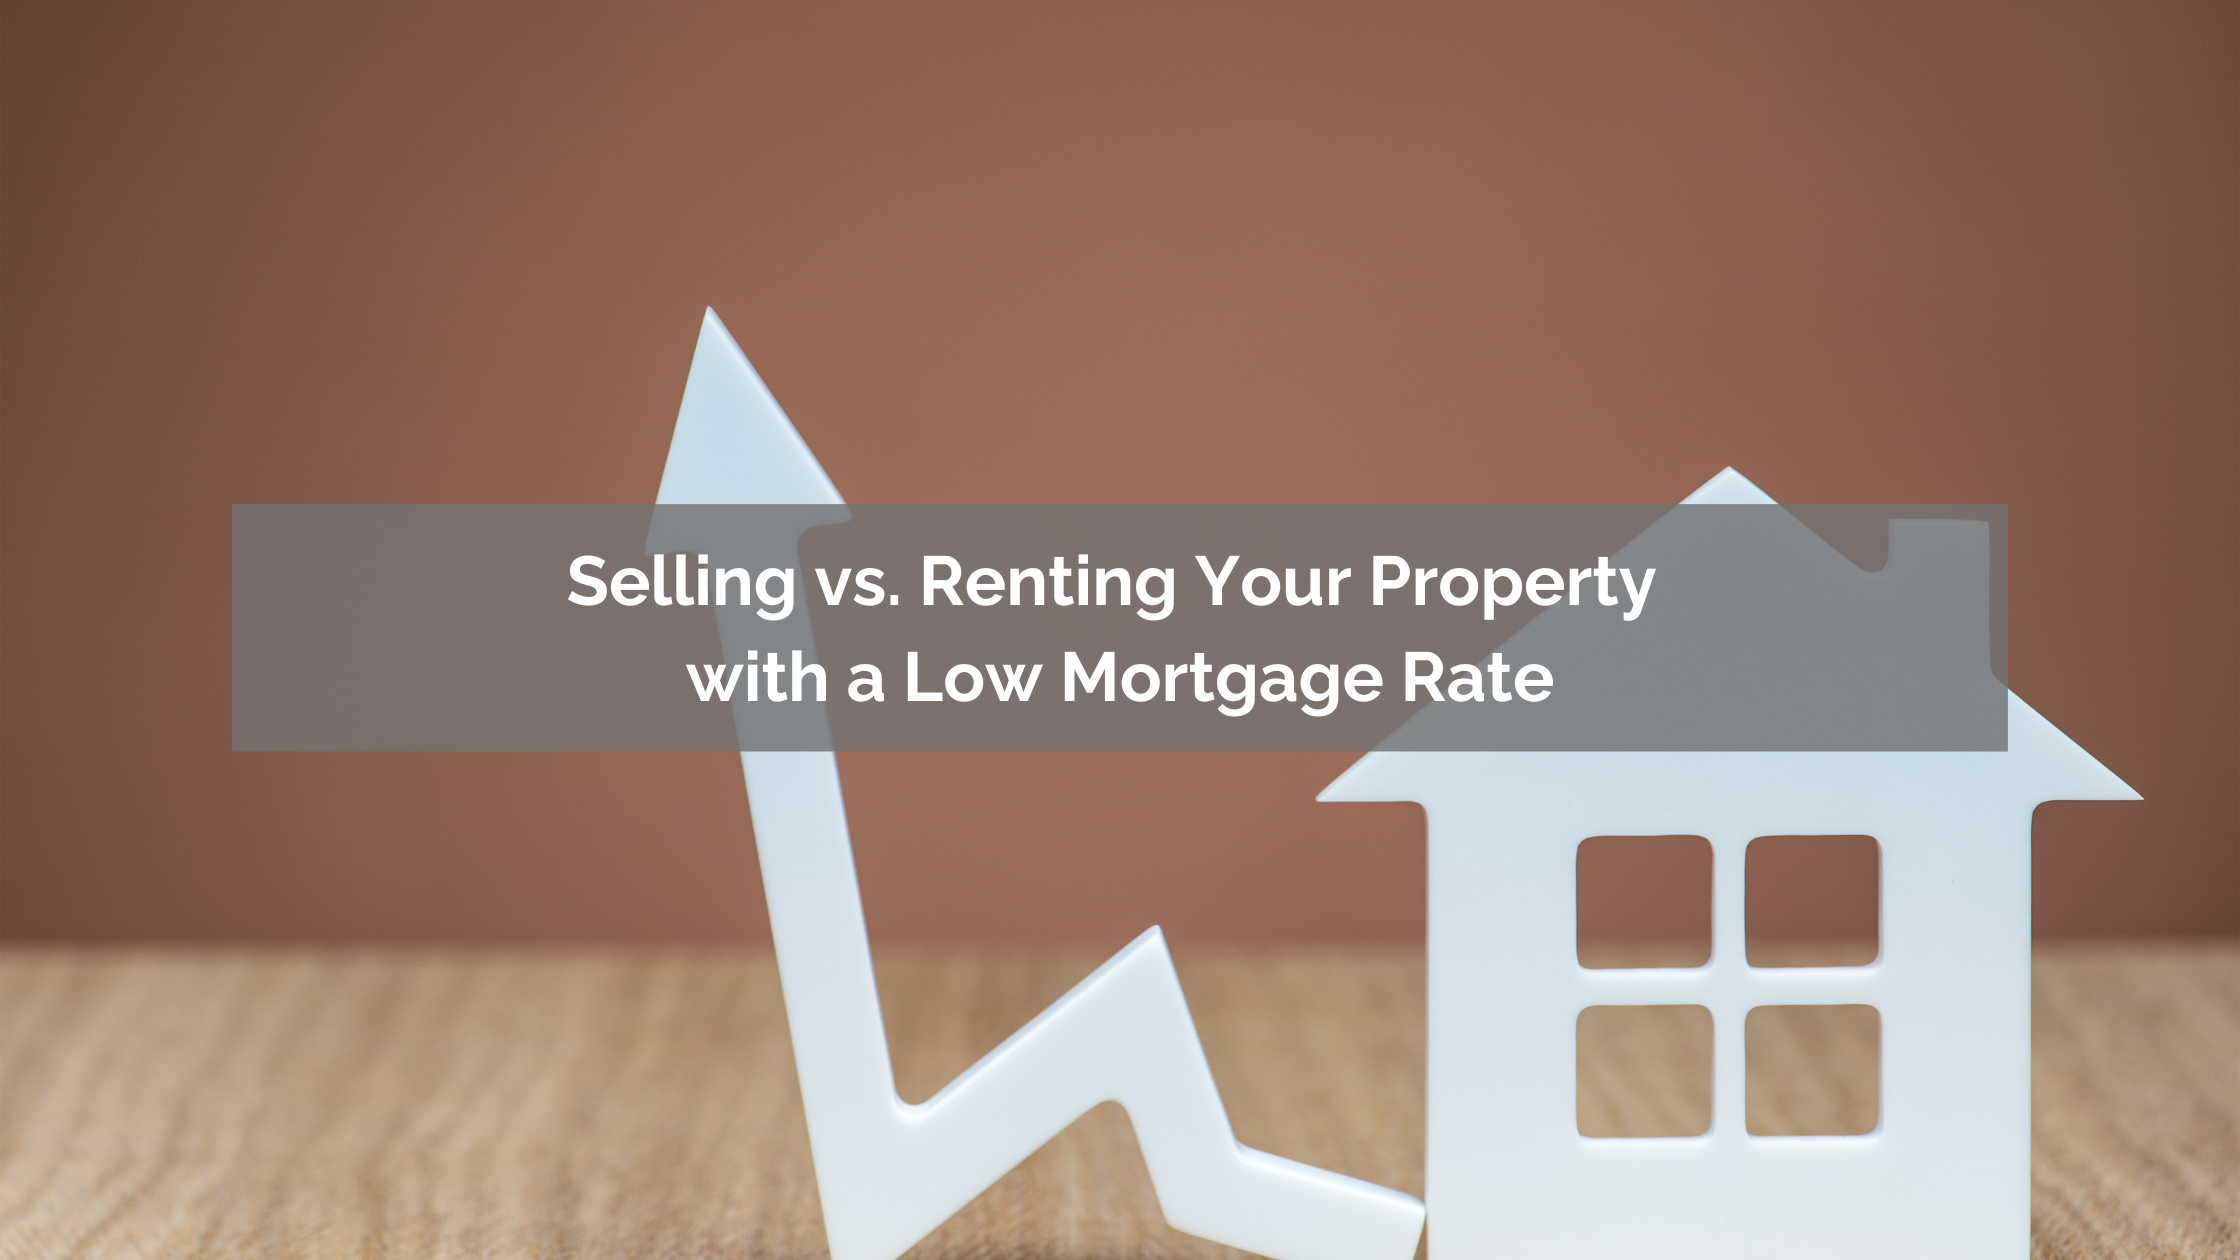 Selling vs. Renting Your Property with a Low Mortgage Rate